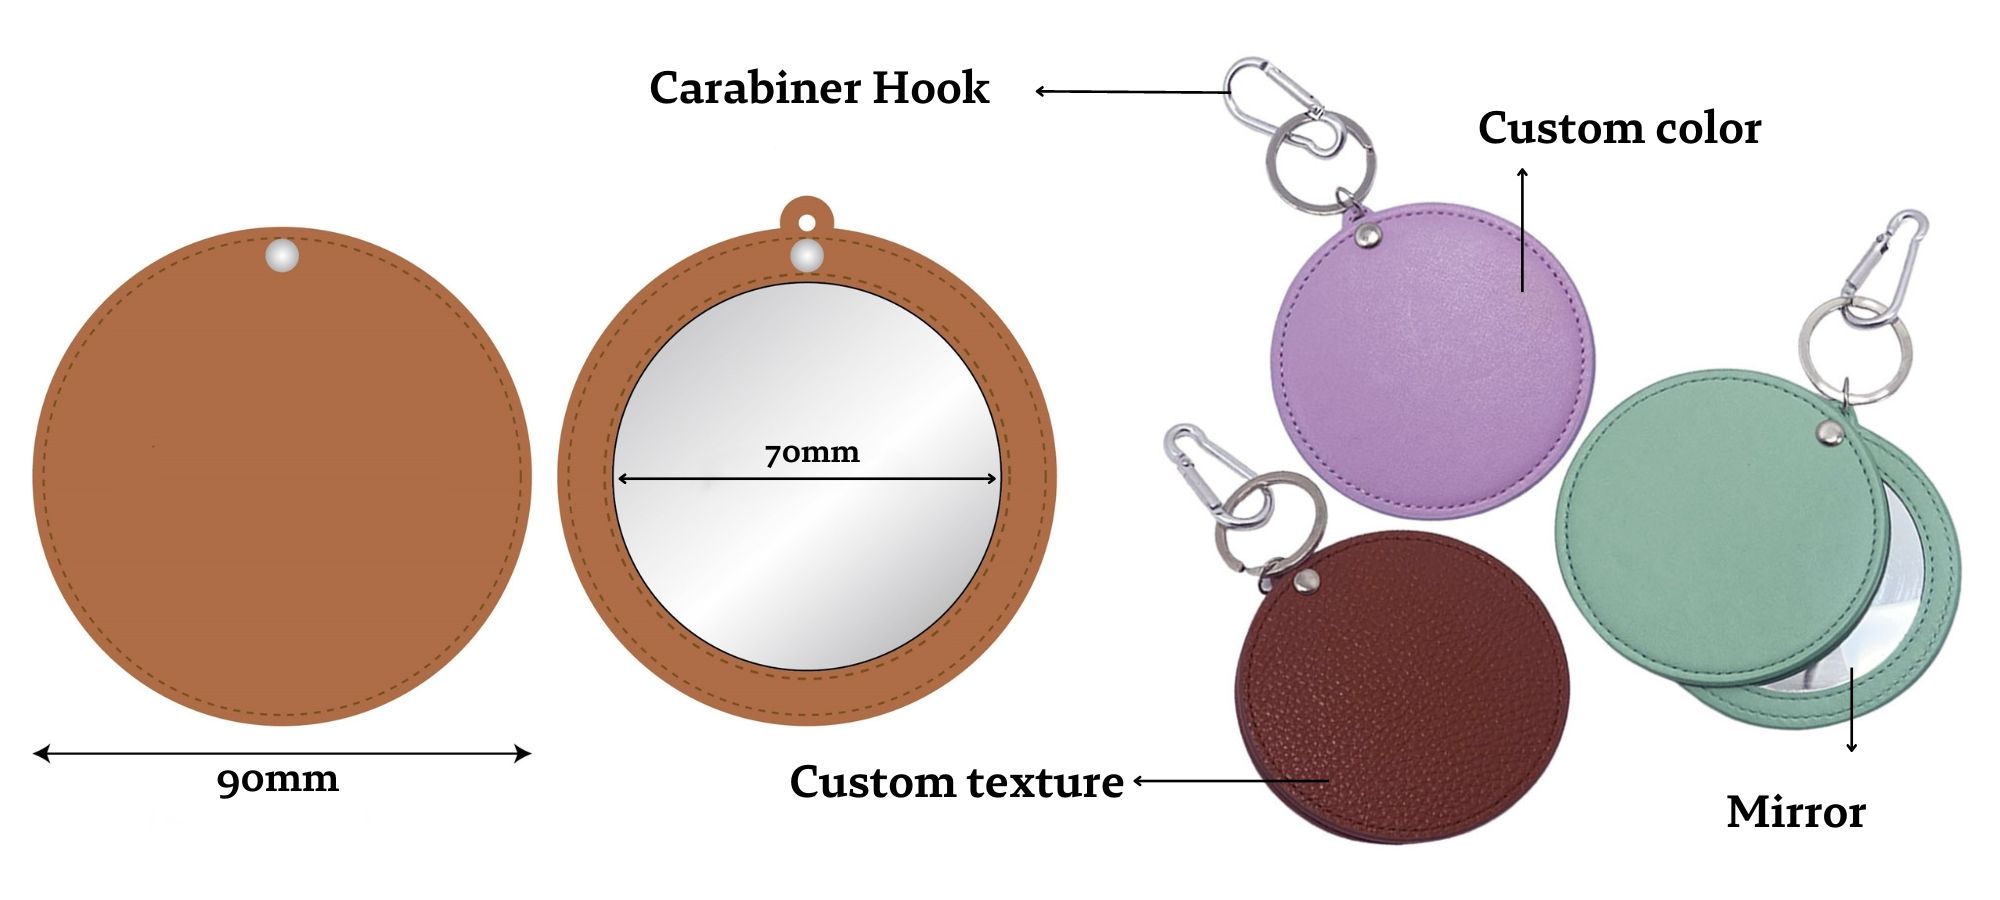 Custom leather compact mirror for purse. 